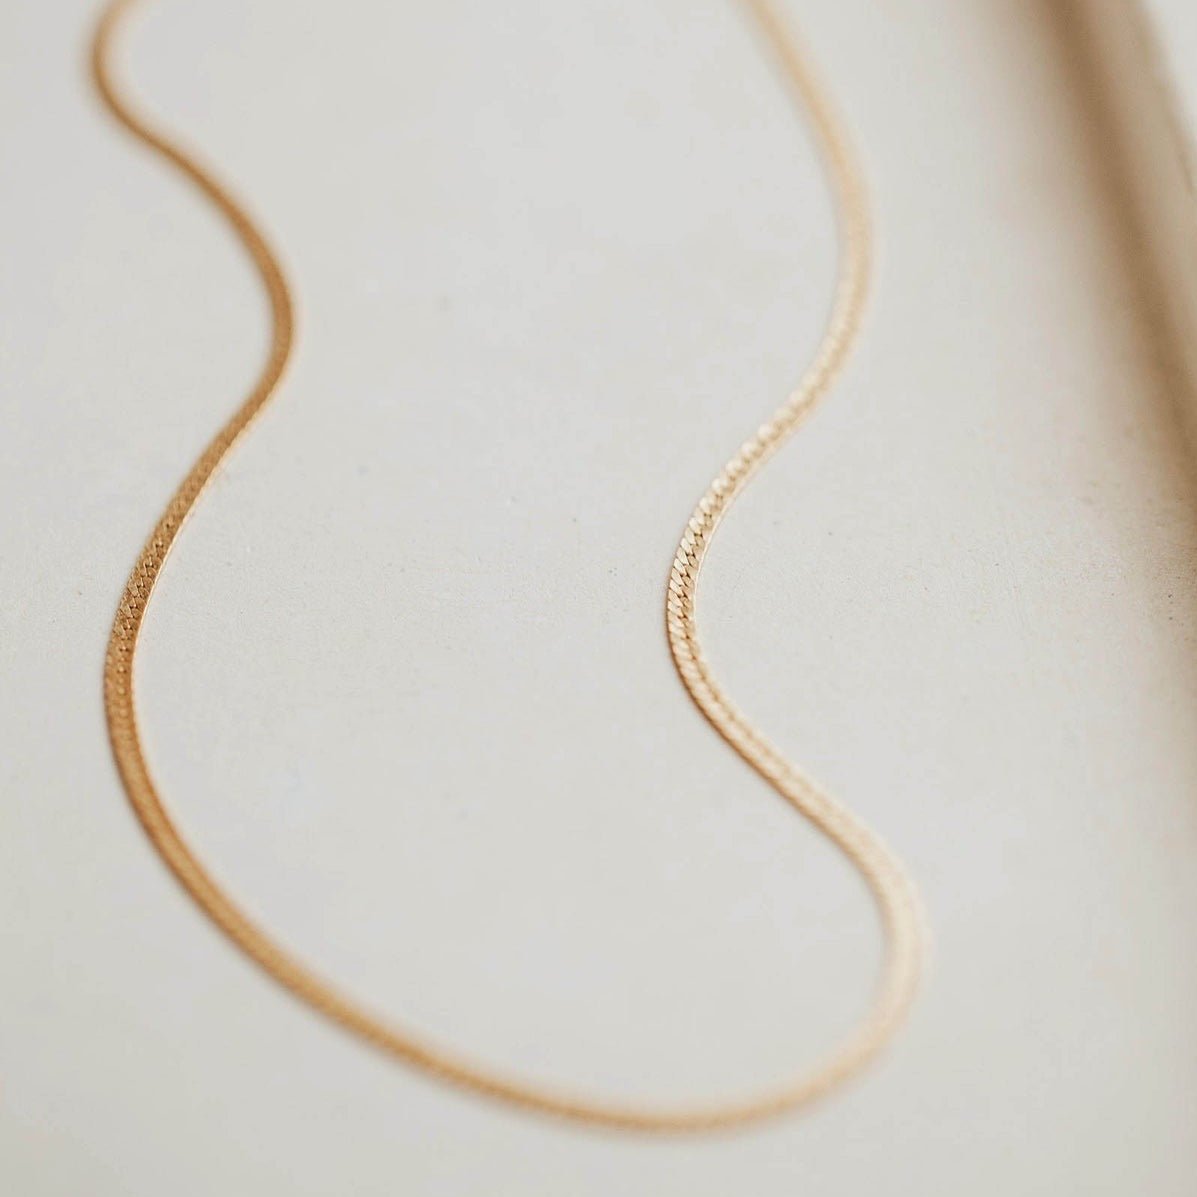 A classic gold tone herringbone necklace. The Bold Herra Necklace is handcrafted by Hello Adorn in Eau Claire, WI.